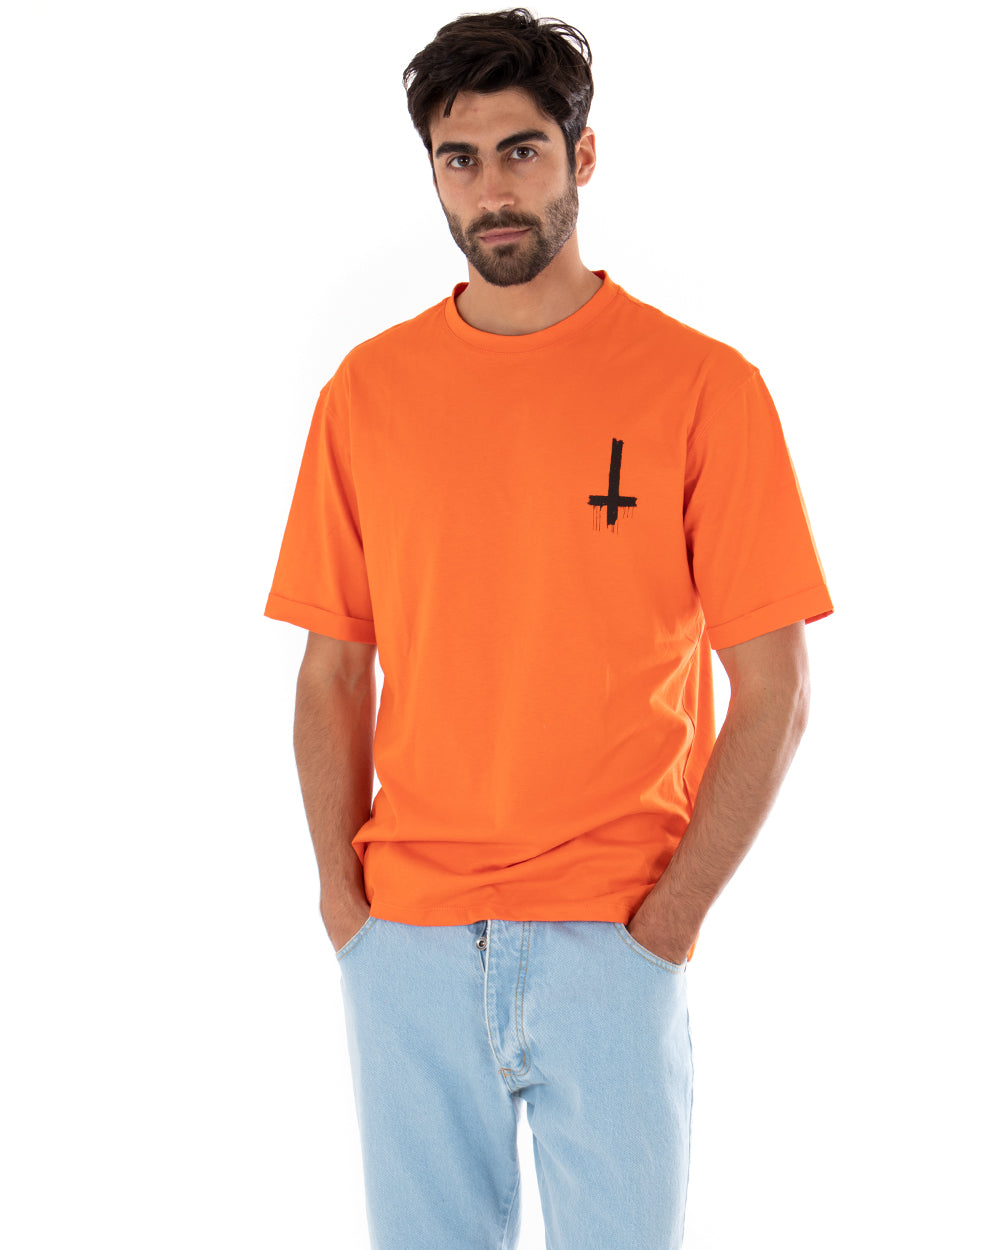 Men's T-shirt Short Sleeves Print Solid Color Orange Cotton Casual GIOSAL